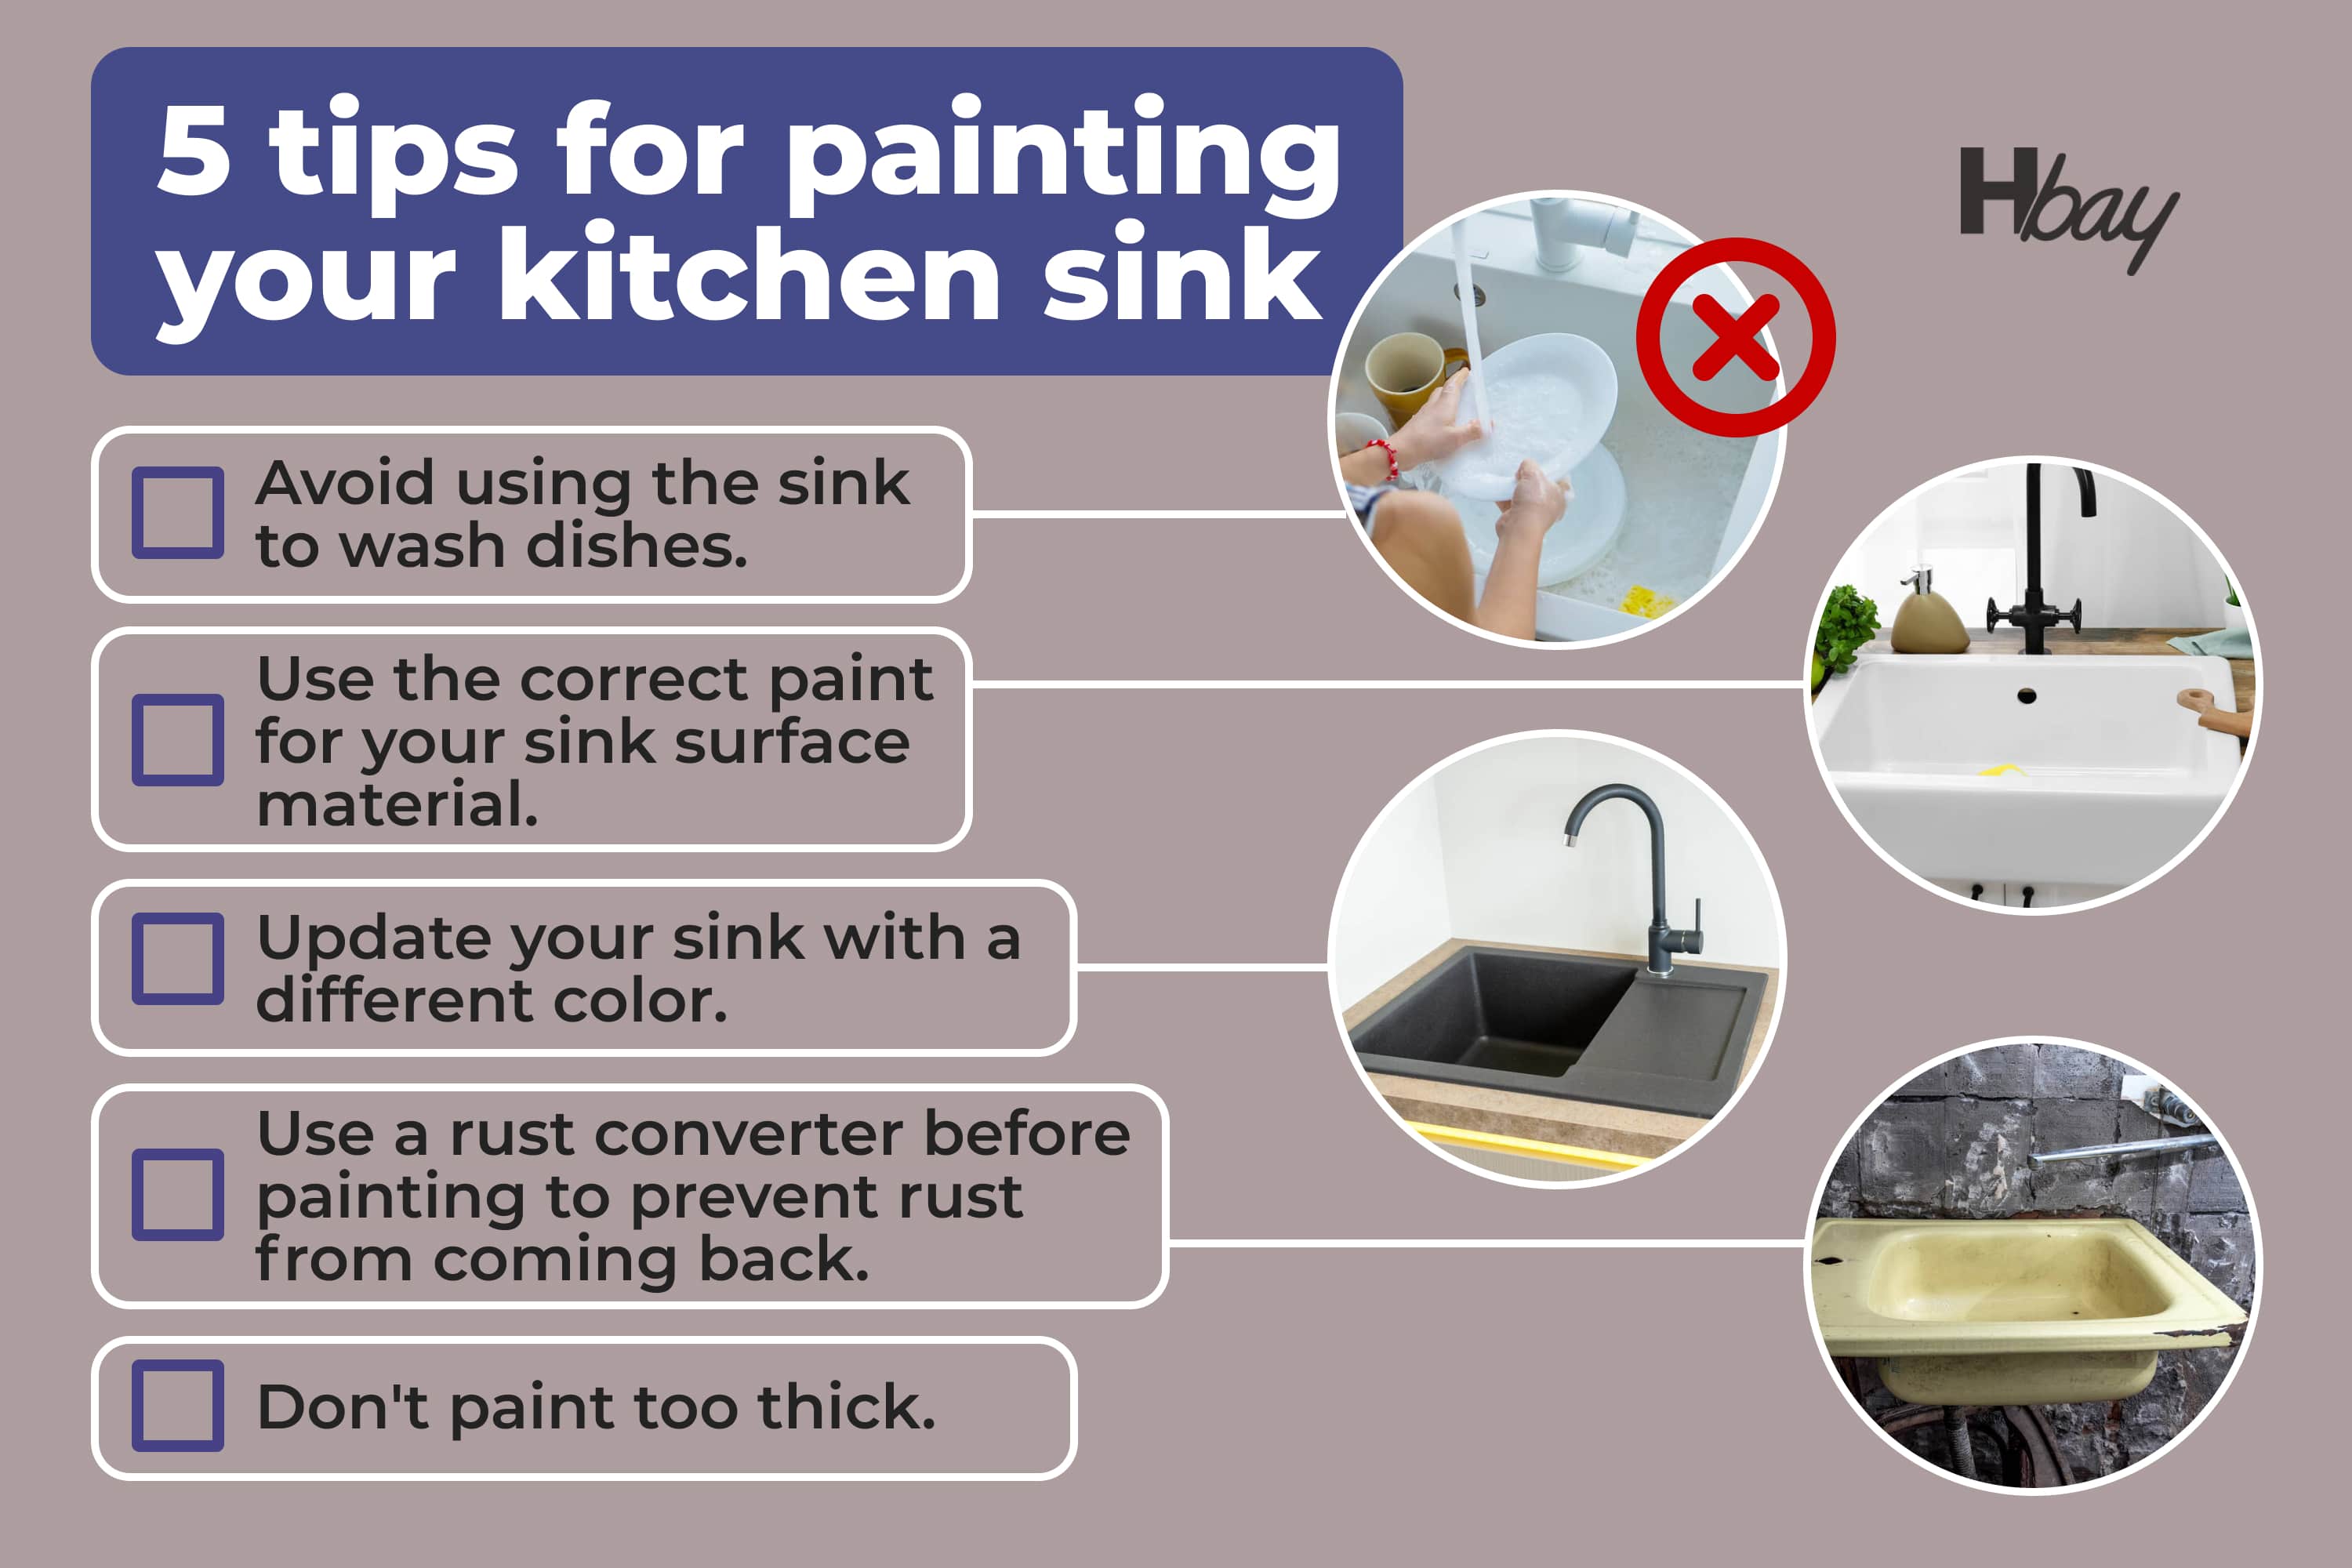 5 tips for painting your kitchen sink